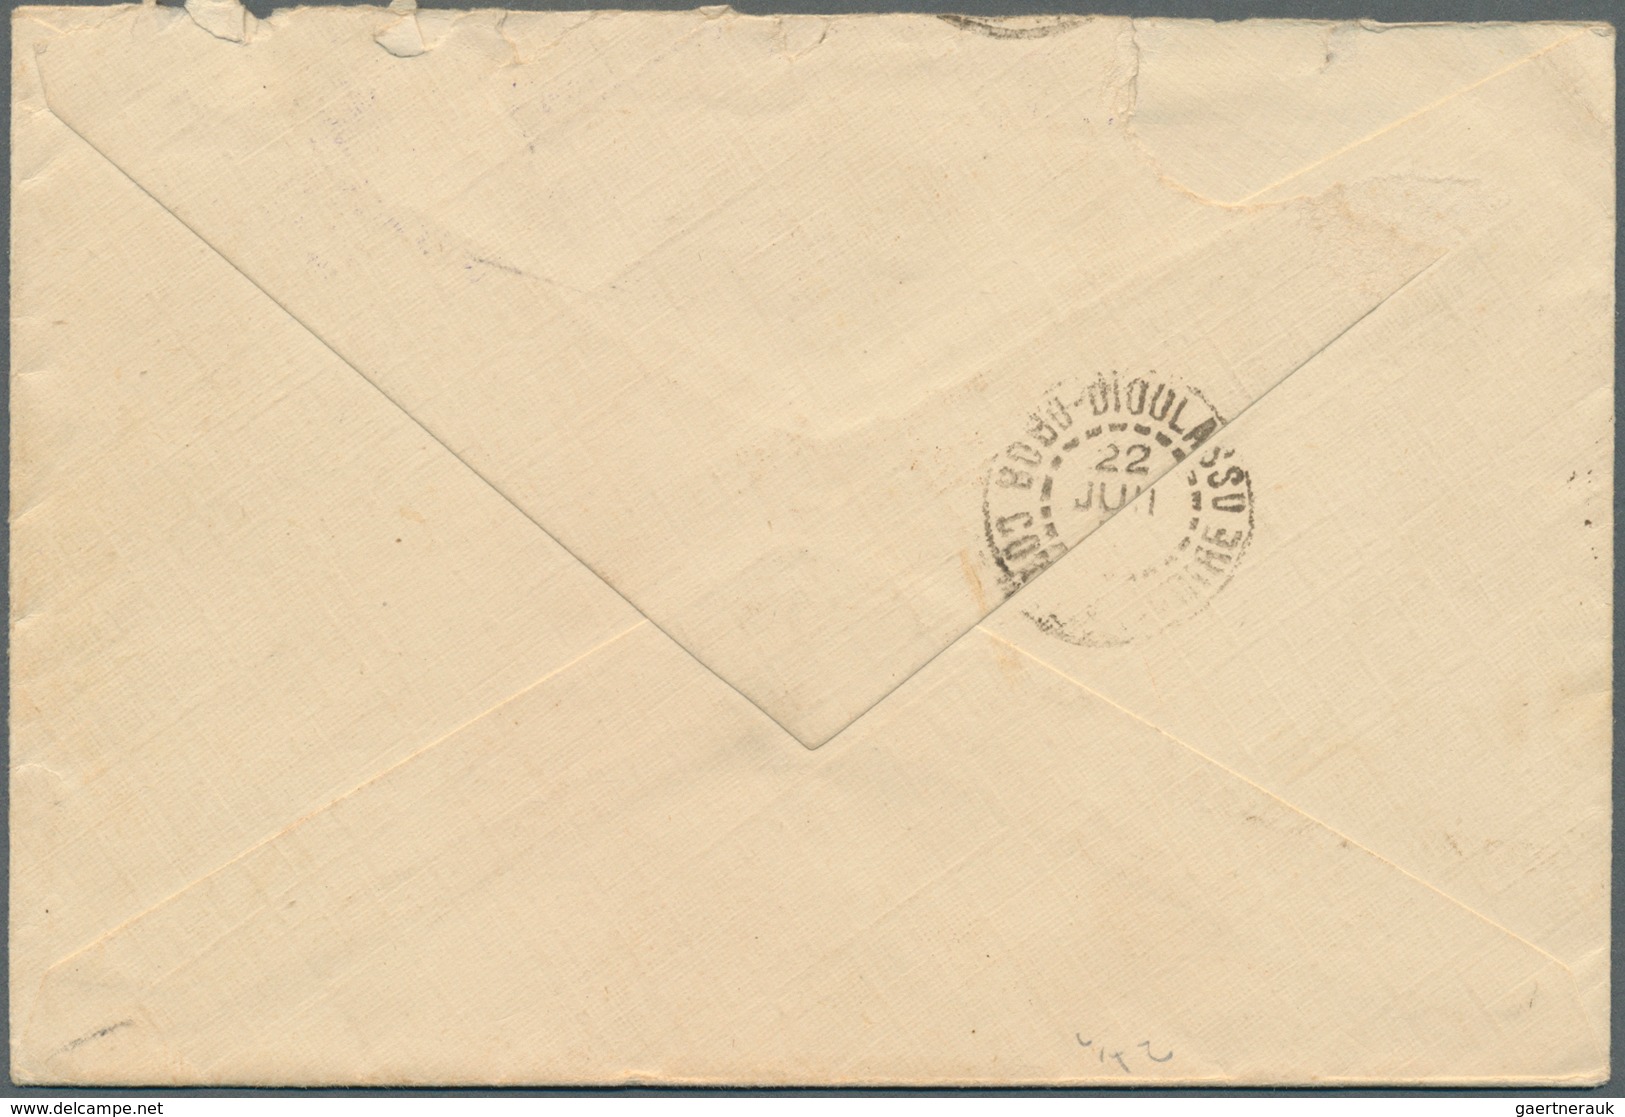 Frankreich - Militärpost / Feldpost: 1938. Military Mail Envelope Dated '13 Juin 1938' Addressed To - Military Postage Stamps